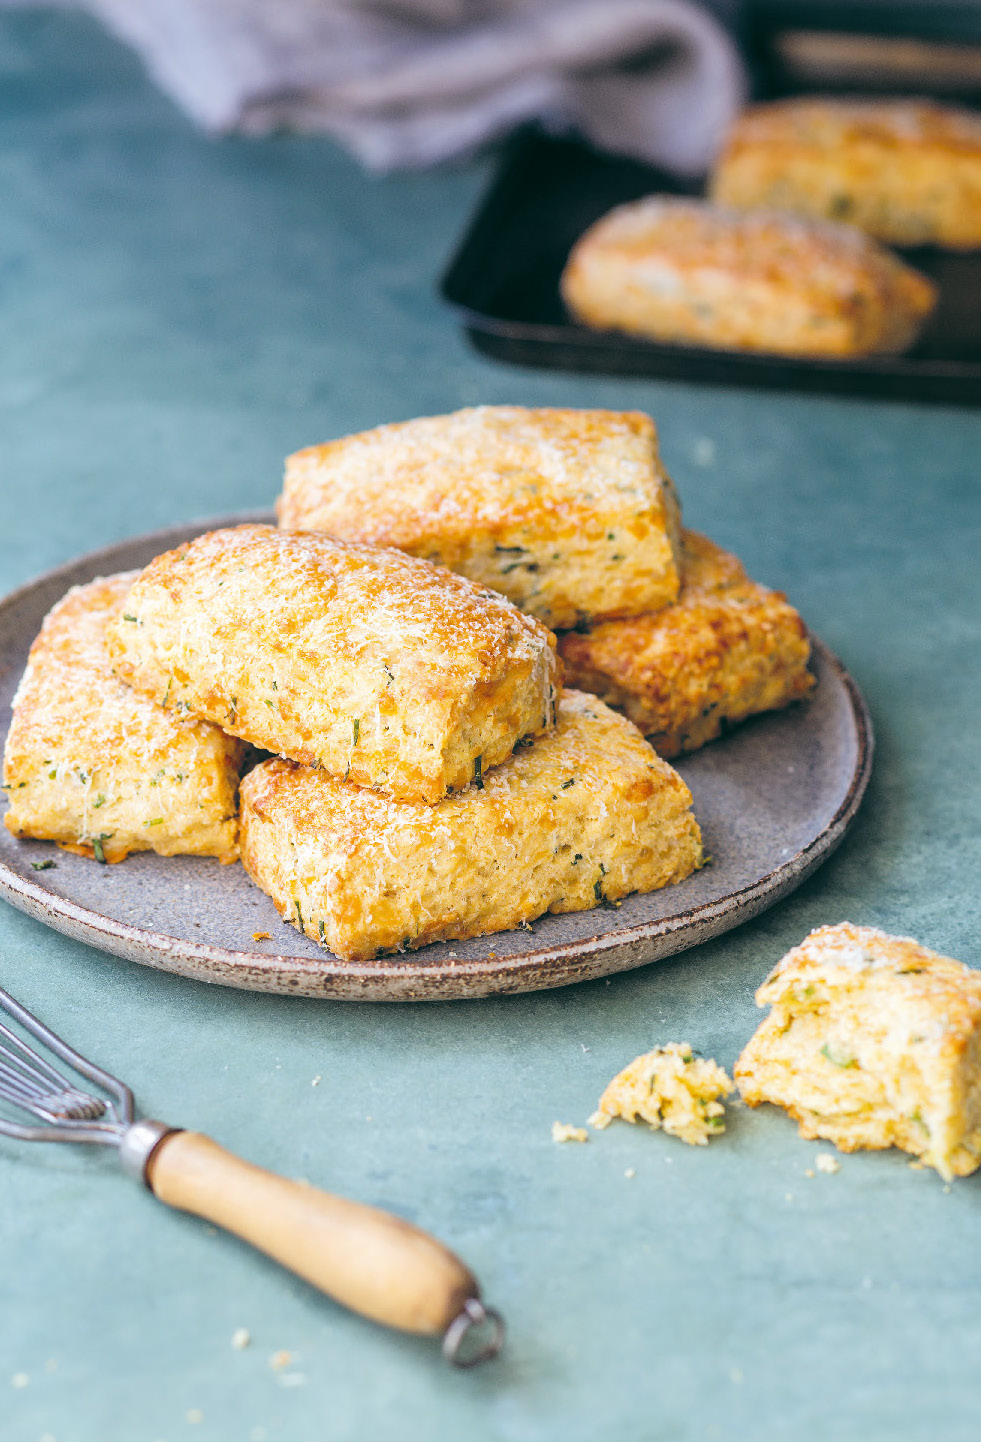 Khorasan, cheddar and chive scones